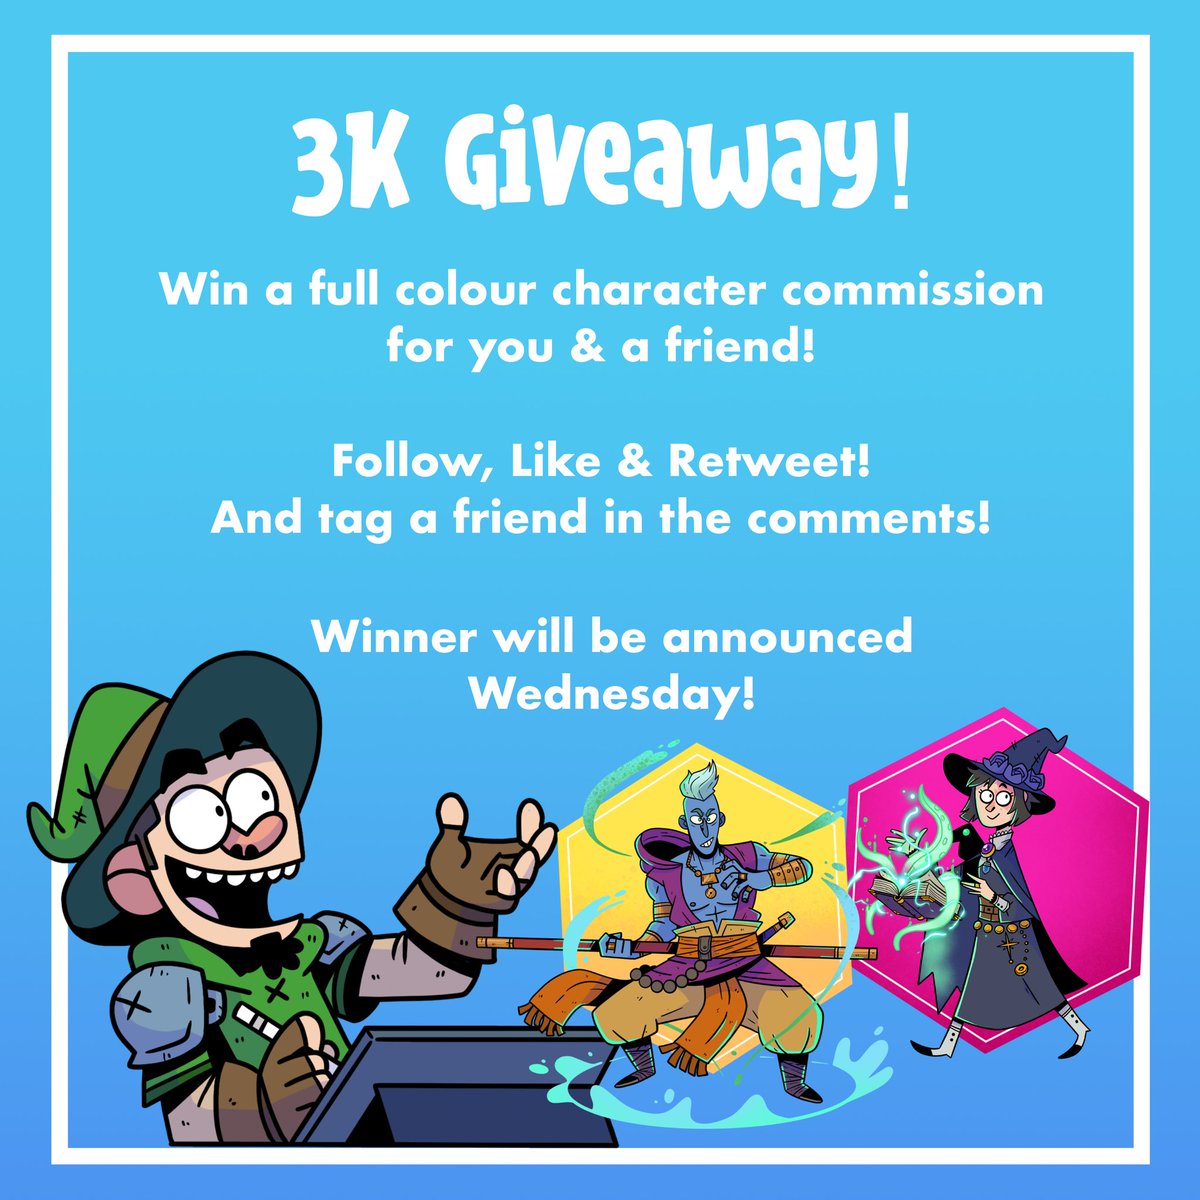 3K follower giveaway! Win a full colour character commission for you & a friend! Just Follow, Like & retweet this tweet and tag a friend in the comments! Winner will be announced Wednesday!